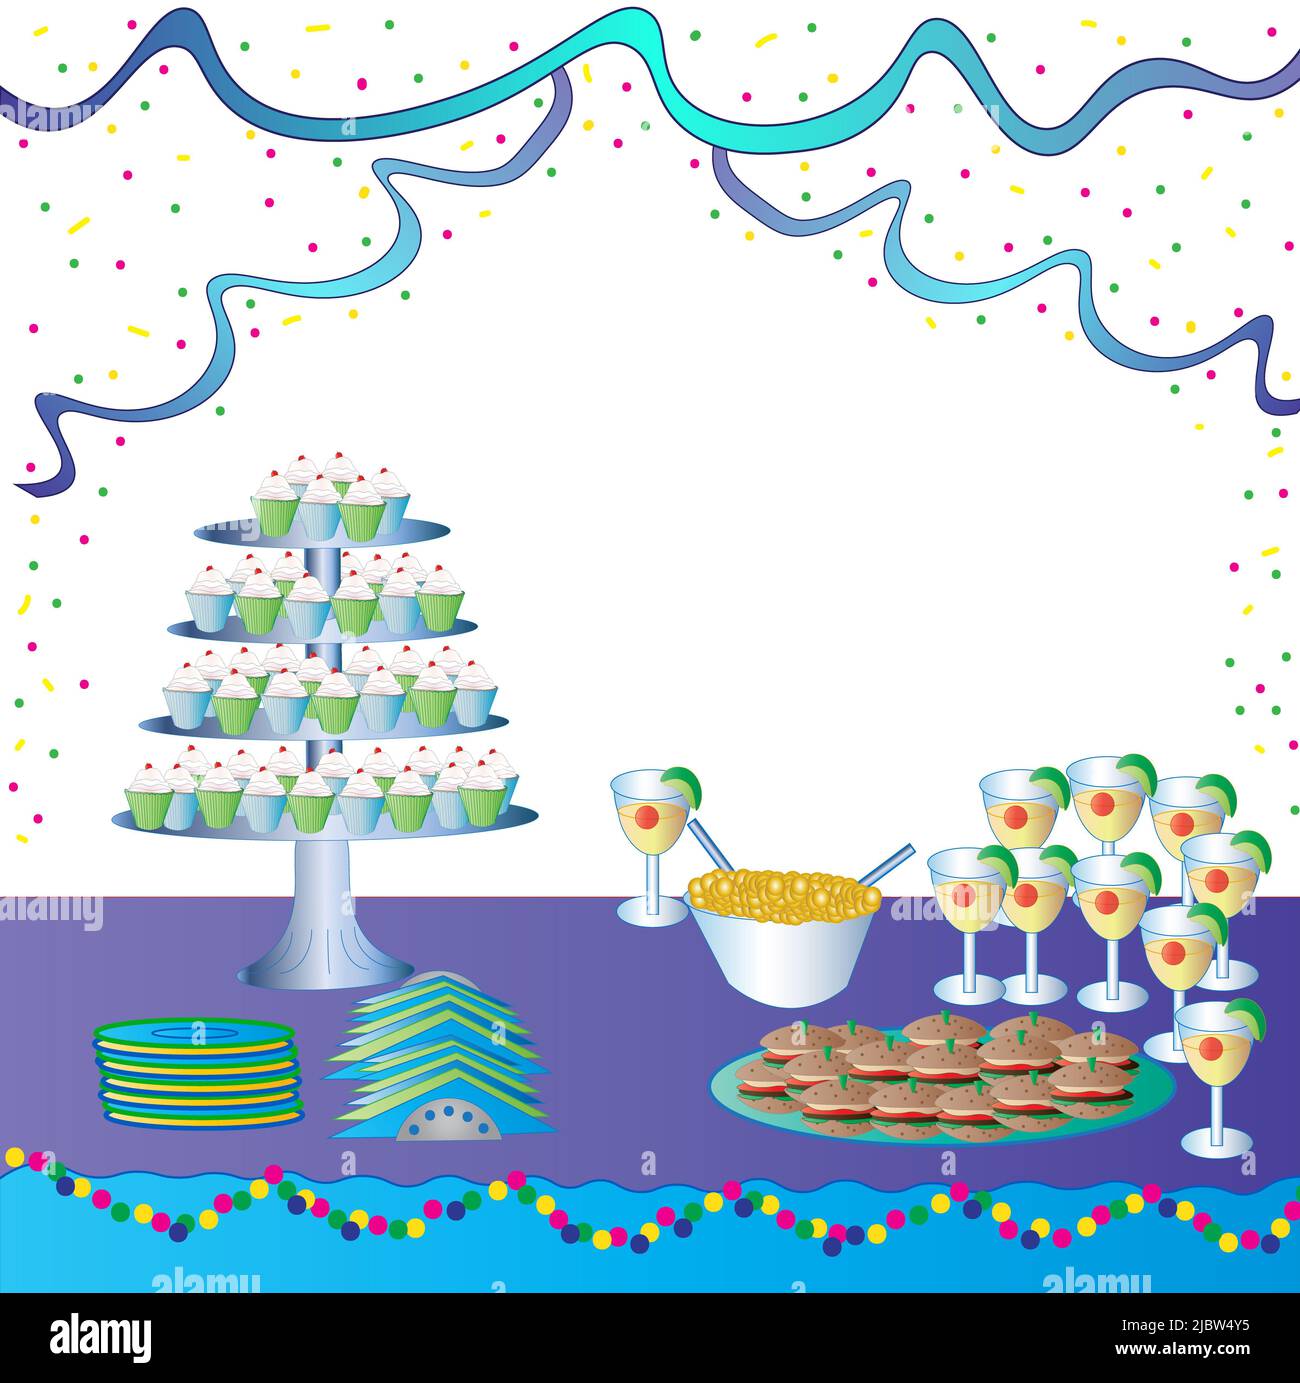 Graphic Party Image including 4-tier Cupcake Tray, drinks, food, and decorations Stock Photo